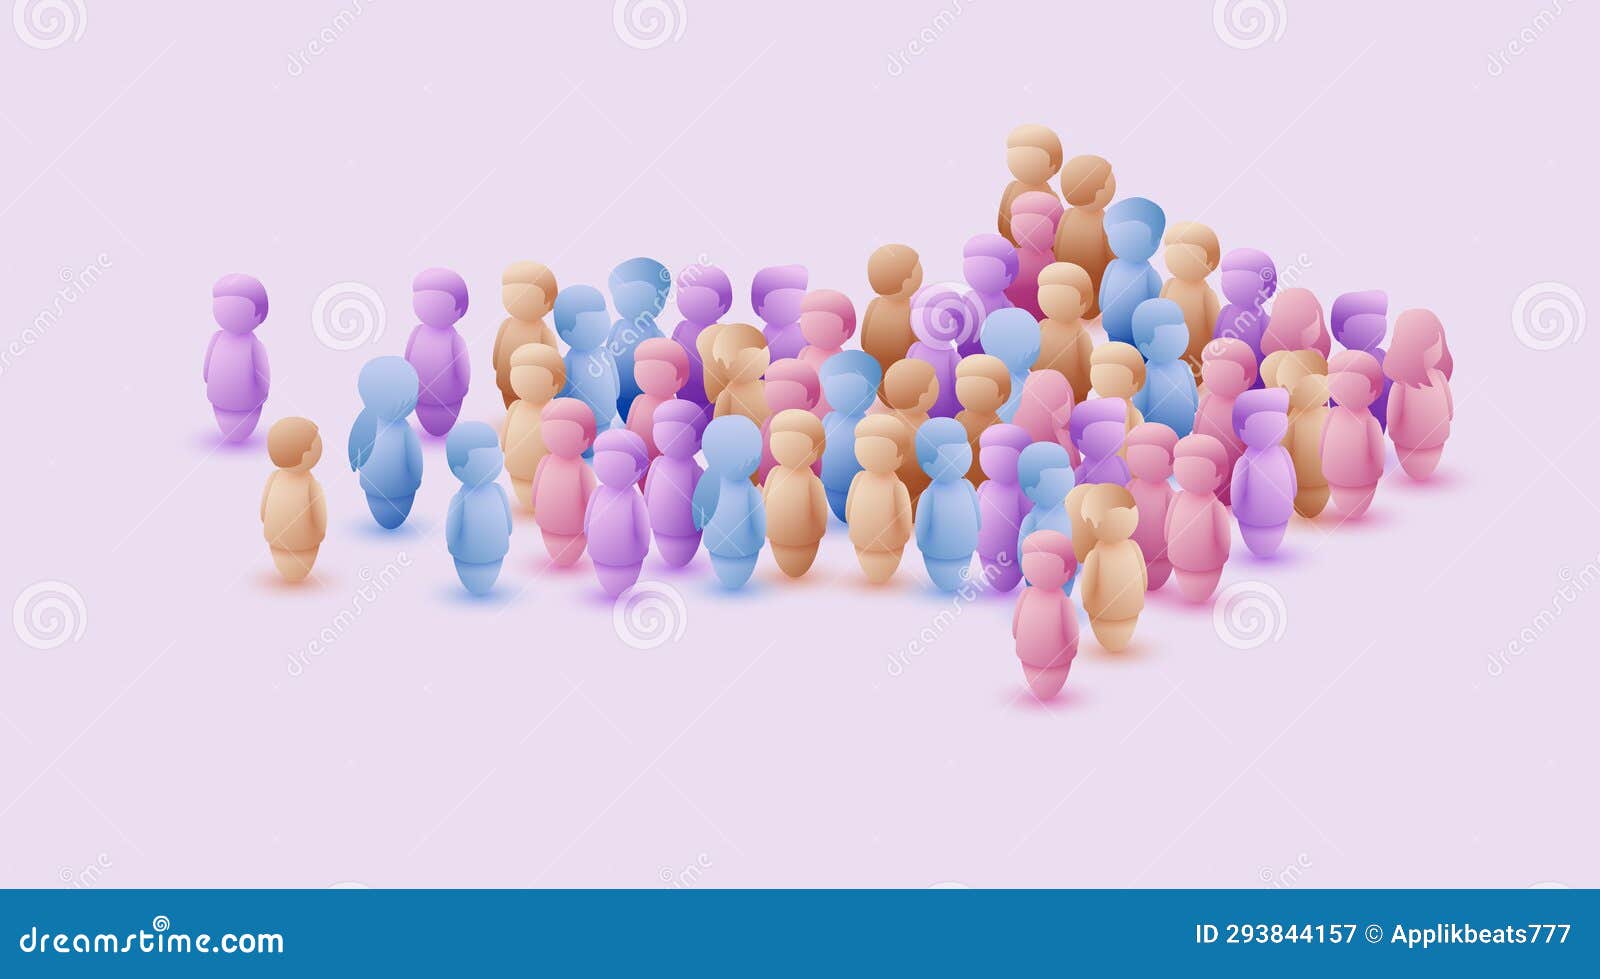 Large Group of People in the Shape of an Arrow, Business, and ...